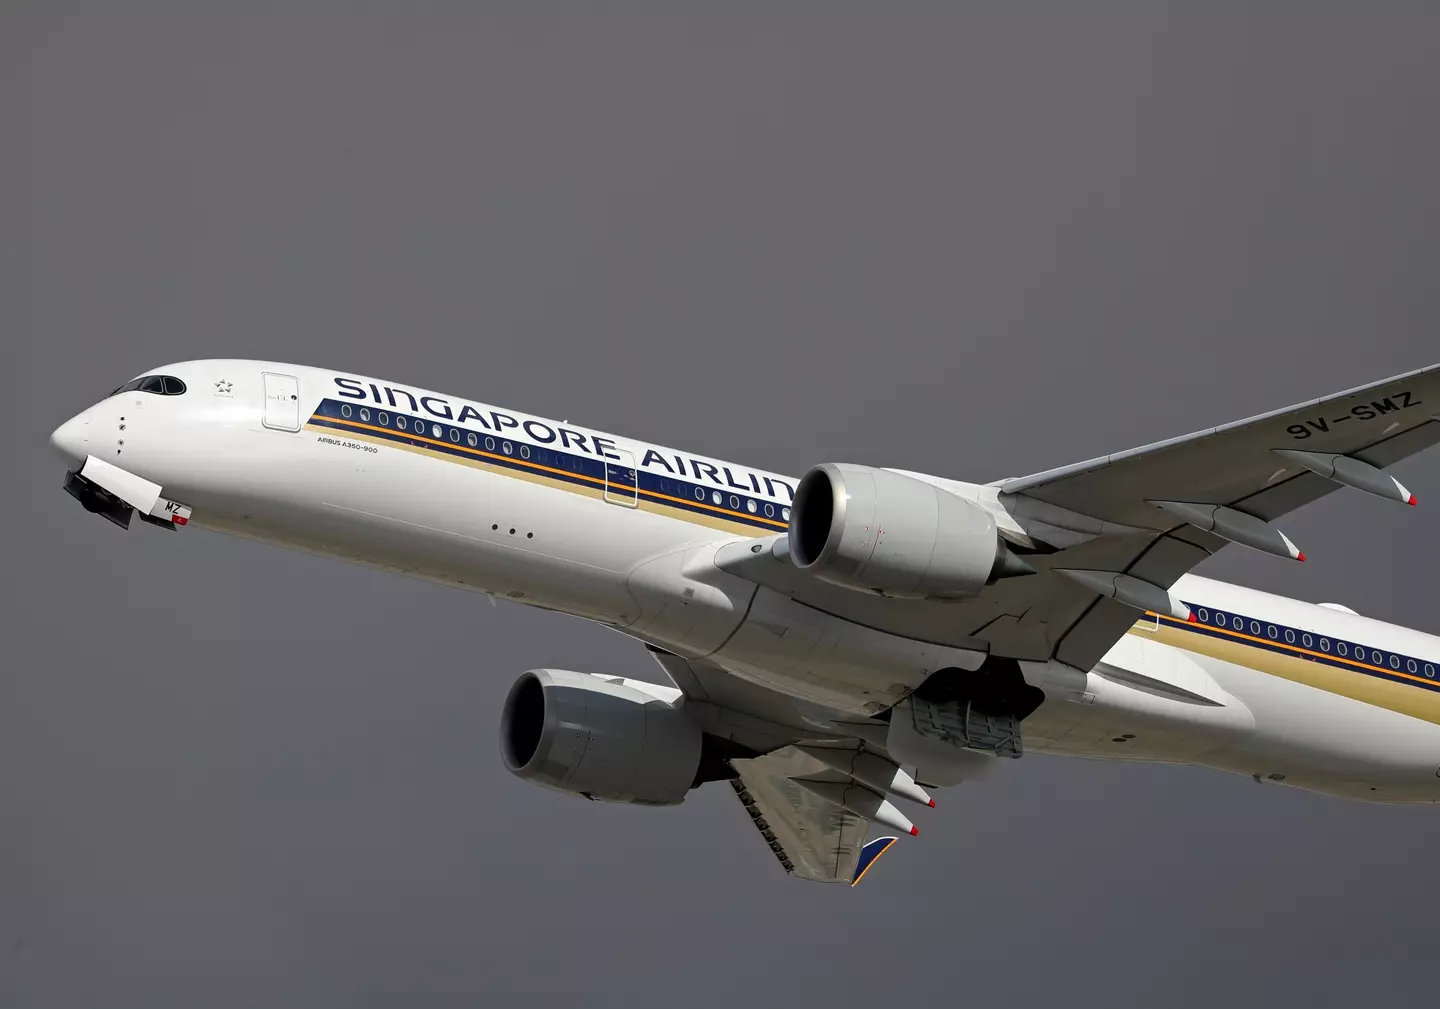 Singapore Airlines has made changes to its in-flight policies in wake of the incident. (Urbanandsport/NurPhoto via Getty Images)